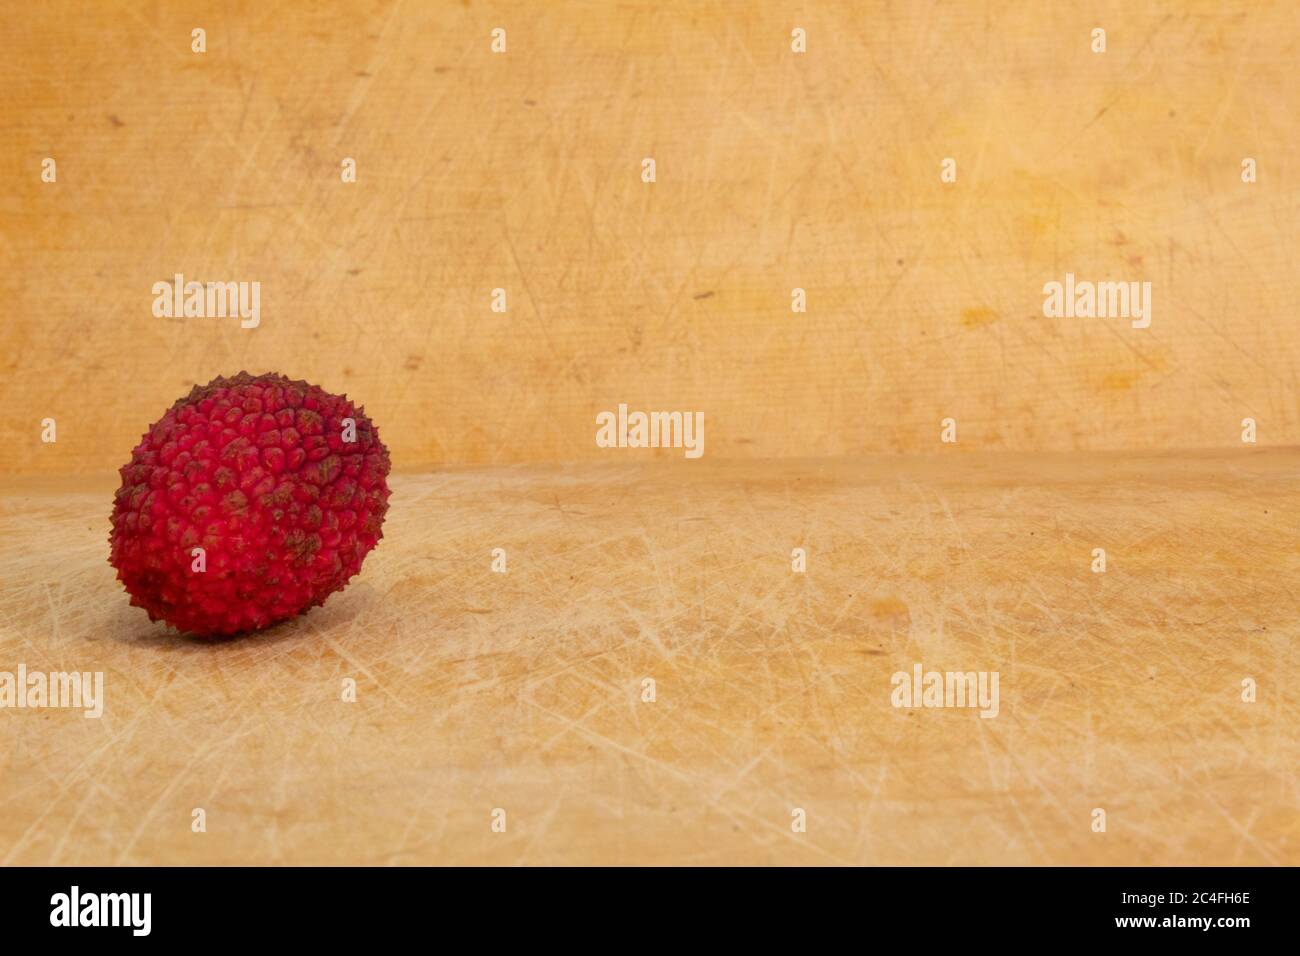 one single red lychee on a wooden colored background Stock Photo